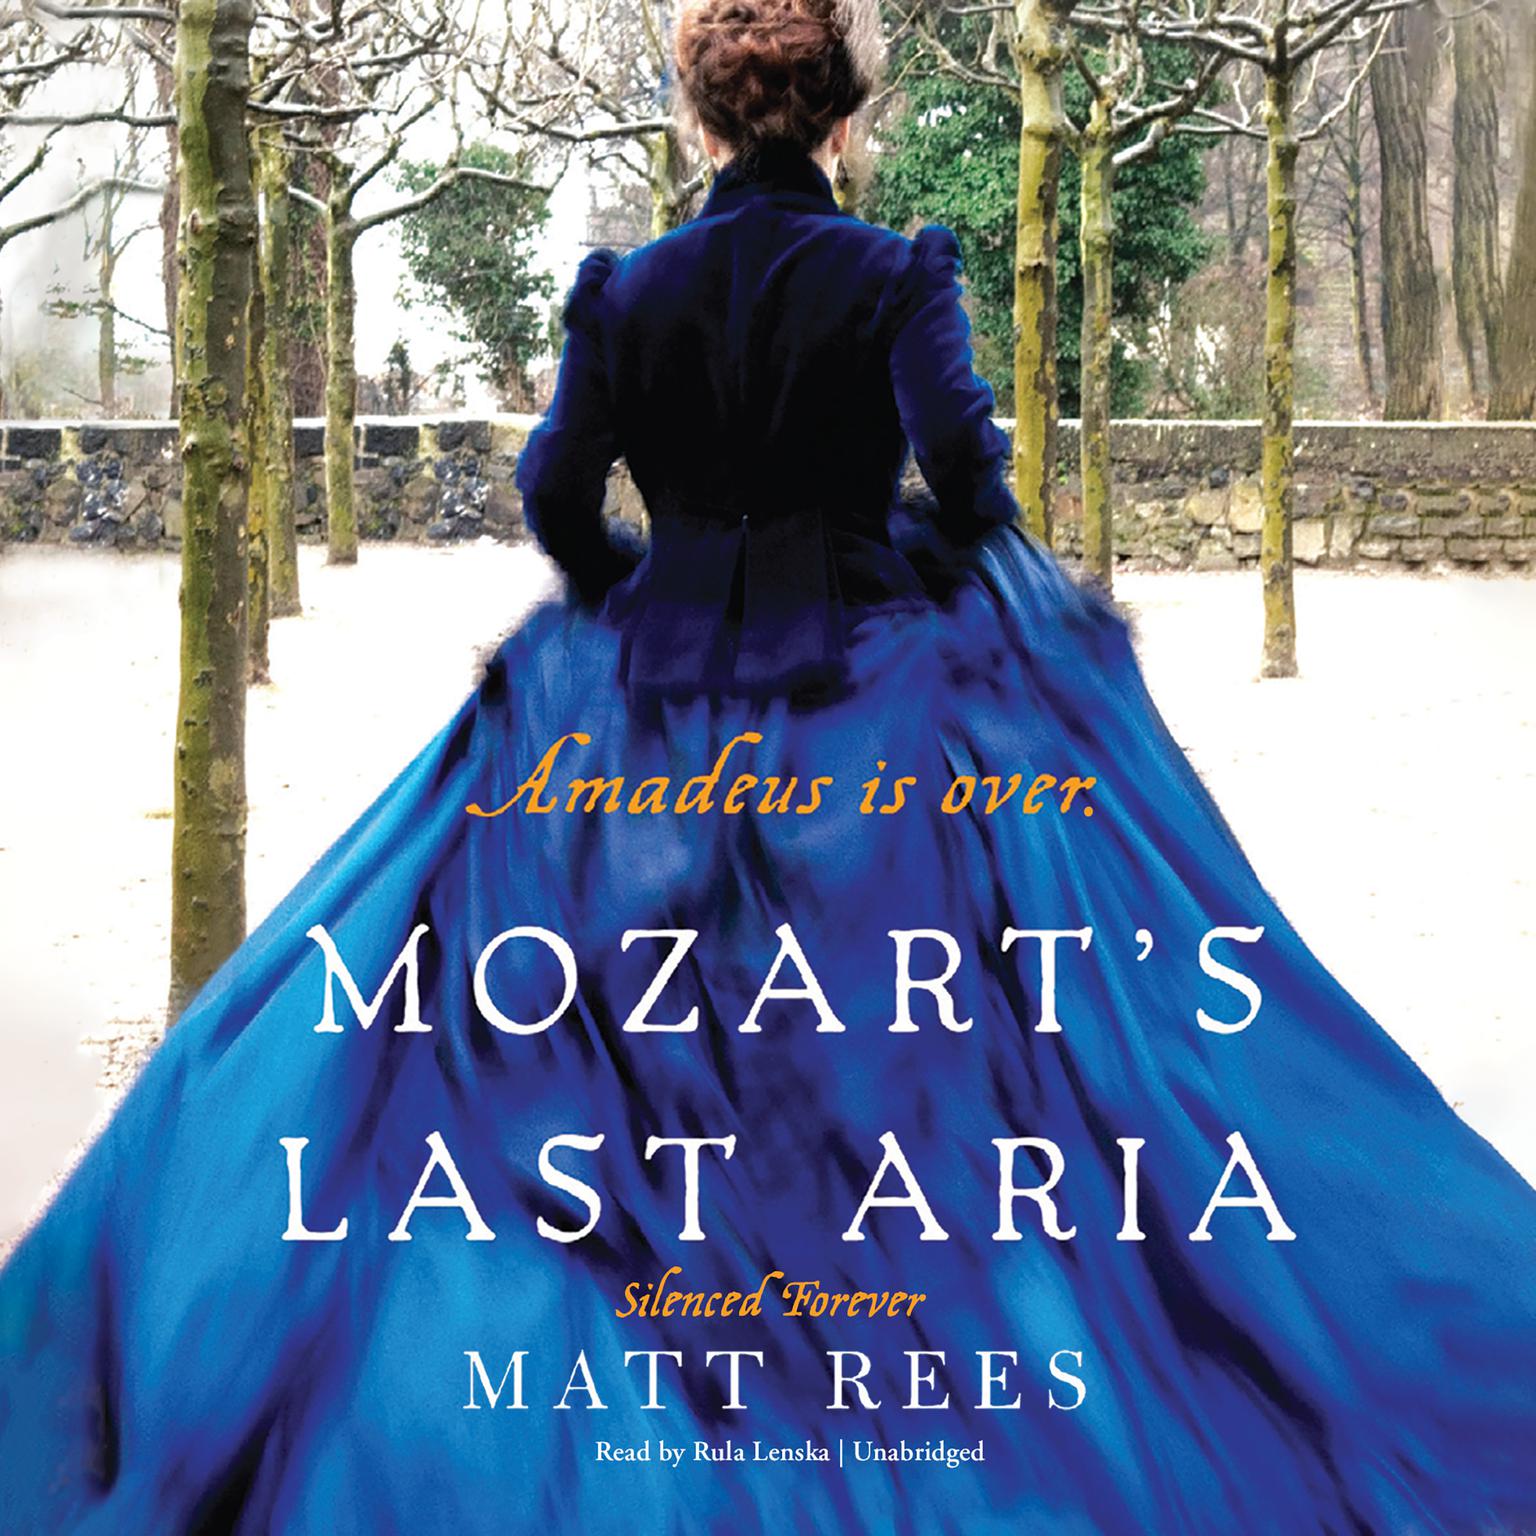 Mozart’s Last Aria: Silenced Forever Audiobook, by Matt Rees